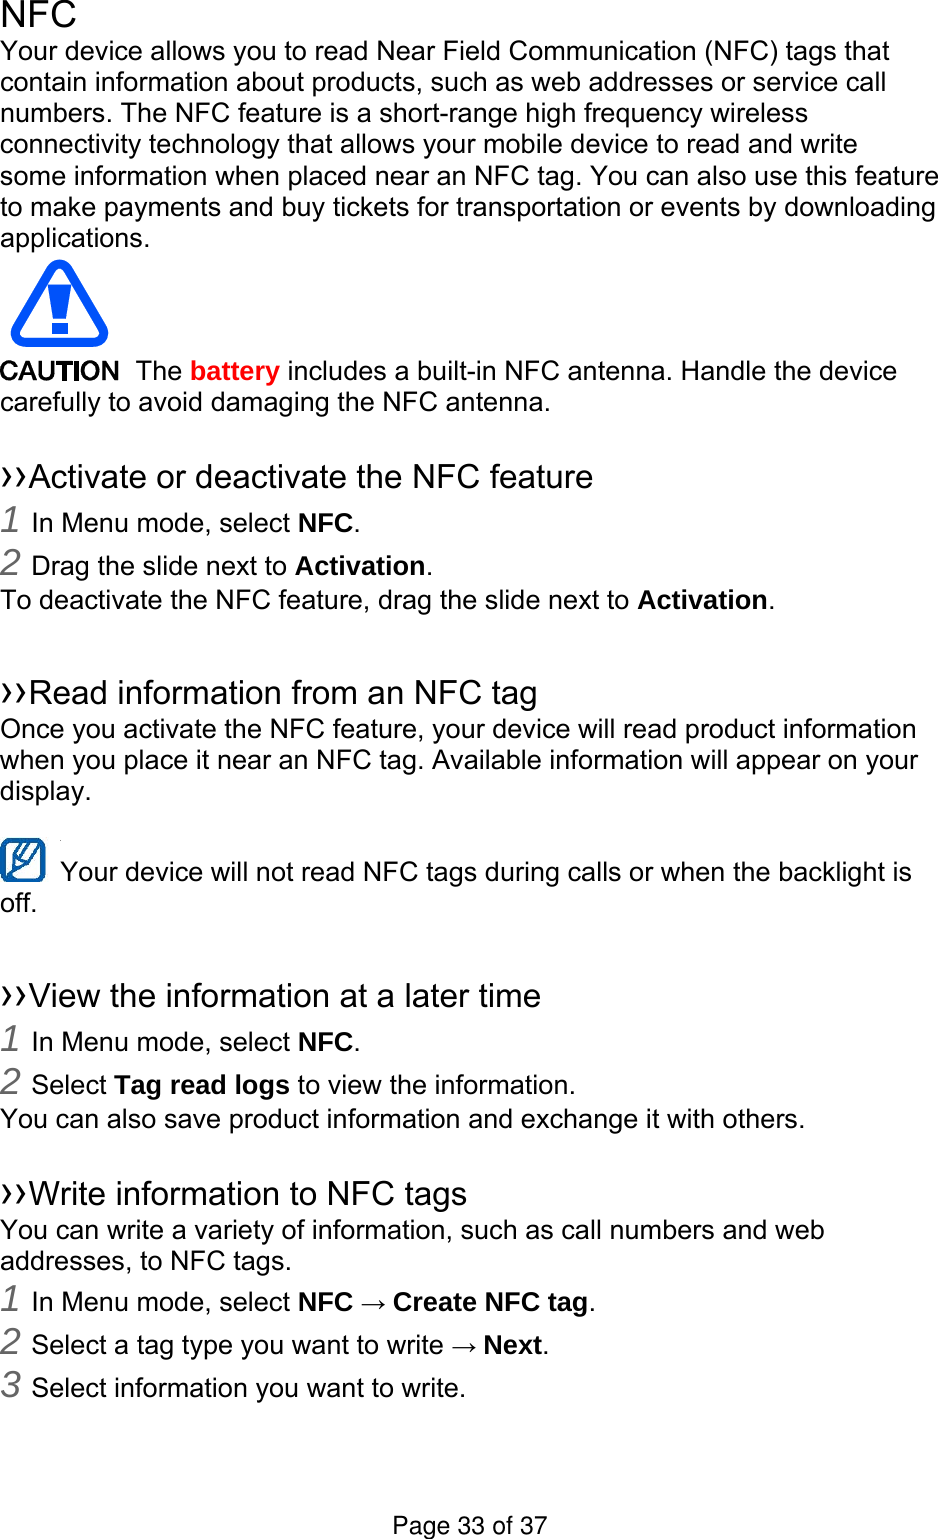 NFC Your device allows you to read Near Field Communication (NFC) tags that contain information about products, such as web addresses or service call numbers. The NFC feature is a short-range high frequency wireless connectivity technology that allows your mobile device to read and write some information when placed near an NFC tag. You can also use this feature to make payments and buy tickets for transportation or events by downloading applications.   The battery includes a built-in NFC antenna. Handle the device carefully to avoid damaging the NFC antenna.  ››Activate or deactivate the NFC feature 1 In Menu mode, select NFC. 2 Drag the slide next to Activation. To deactivate the NFC feature, drag the slide next to Activation.  ››Read information from an NFC tag Once you activate the NFC feature, your device will read product information when you place it near an NFC tag. Available information will appear on your display.  Your device will not read NFC tags during calls or when the backlight is   off.  ››View the information at a later time 1 In Menu mode, select NFC. 2 Select Tag read logs to view the information. You can also save product information and exchange it with others.  ››Write information to NFC tags   You can write a variety of information, such as call numbers and web addresses, to NFC tags. 1 In Menu mode, select NFC → Create NFC tag. 2 Select a tag type you want to write → Next. 3 Select information you want to write. Page 33 of 37